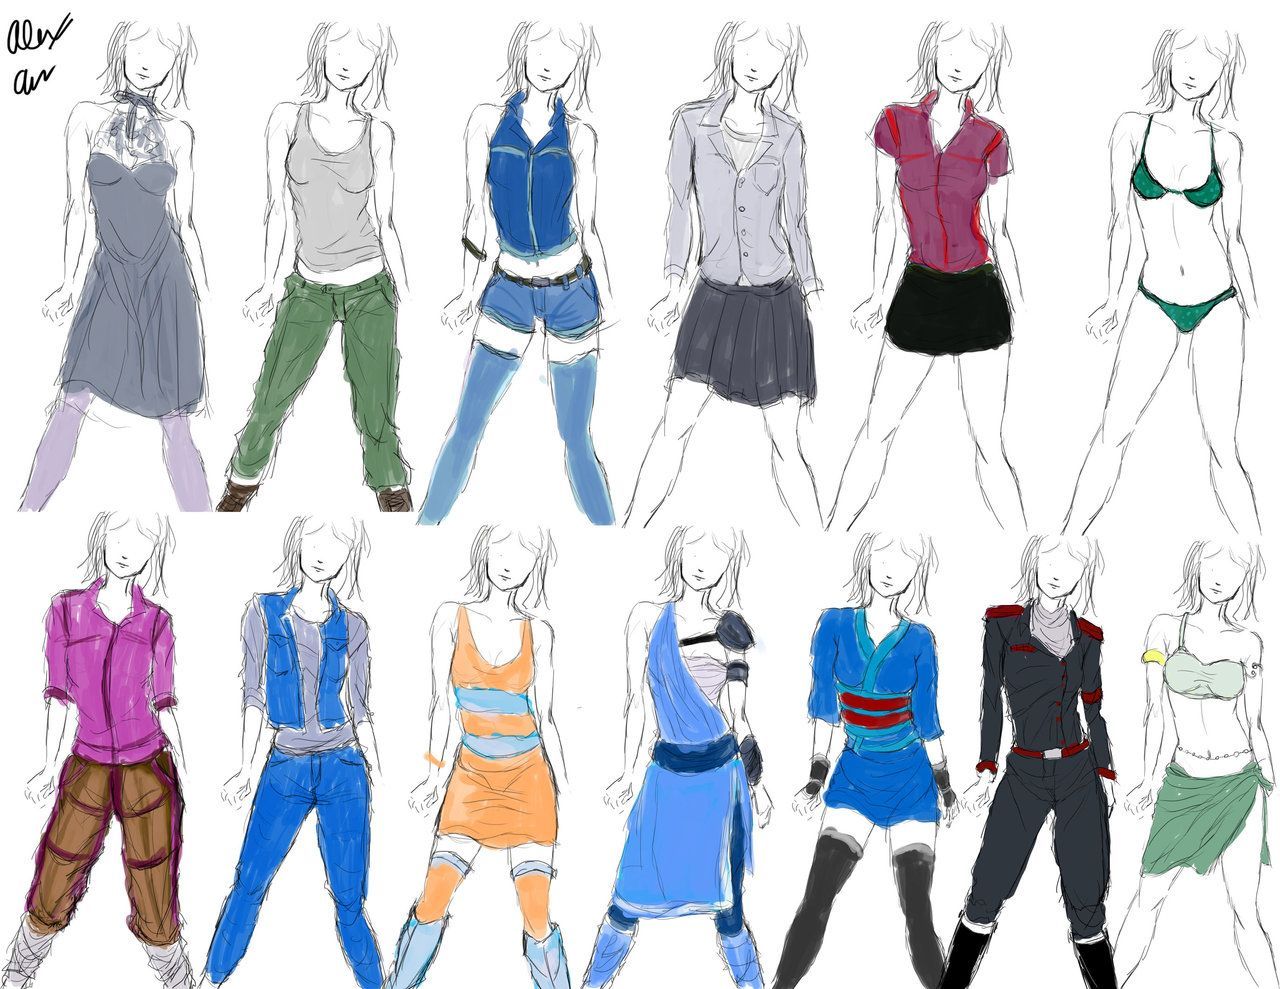 Pin on Ref Clothes concepts ideas